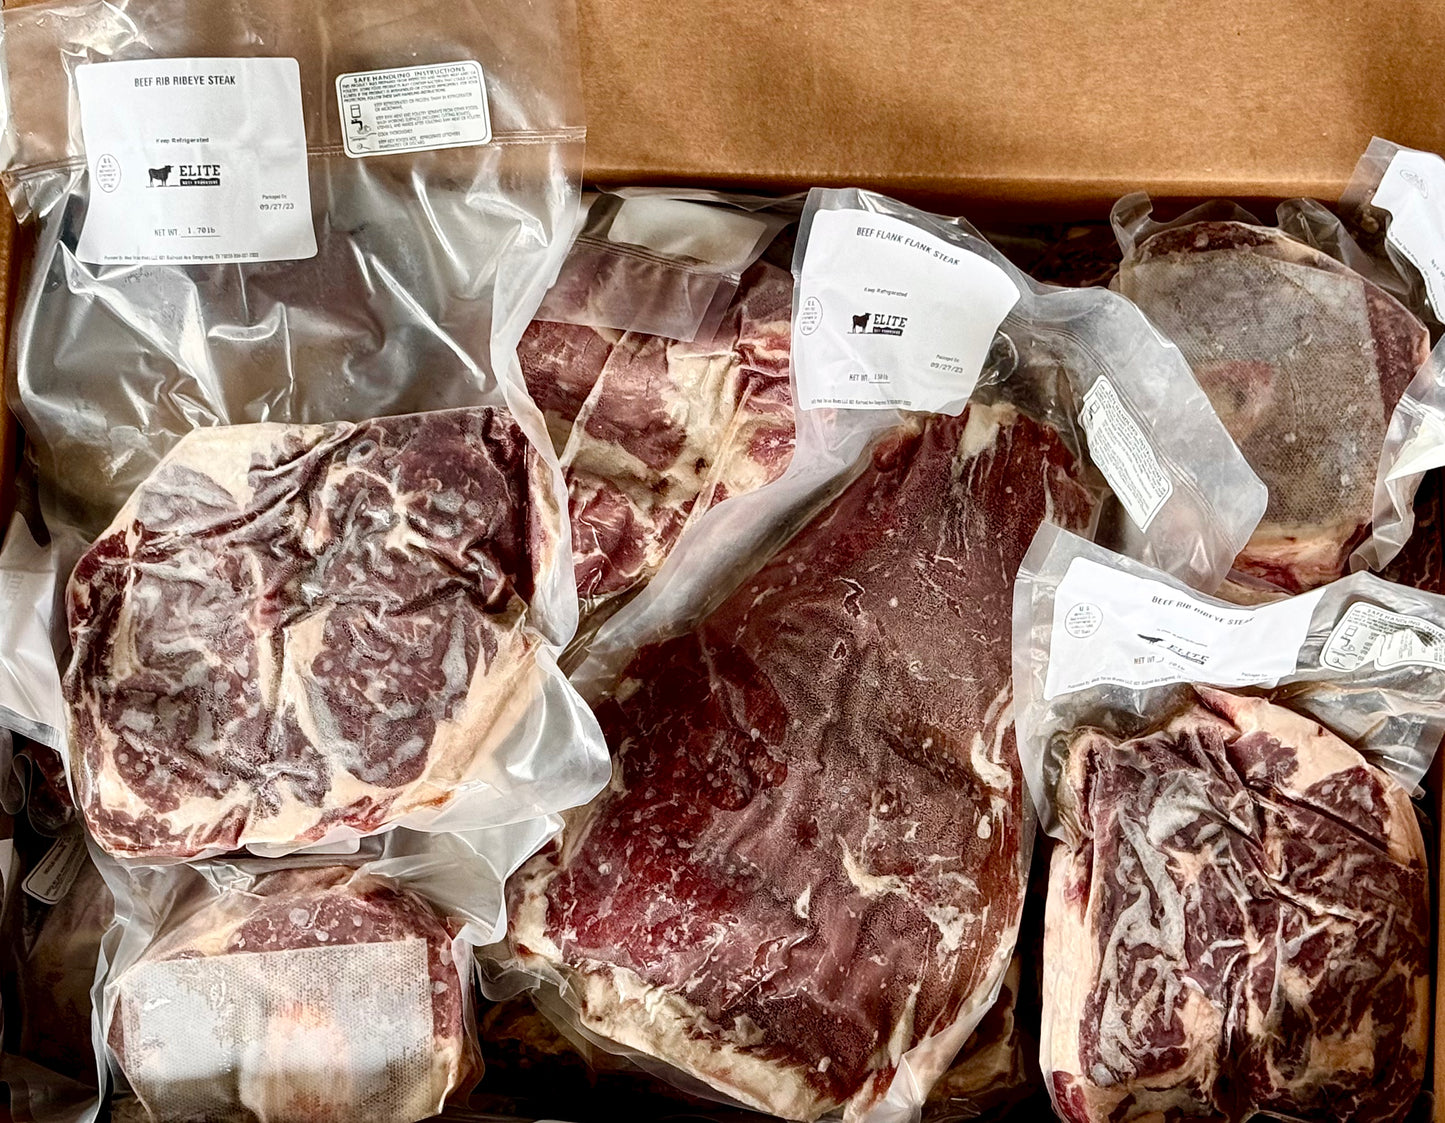 DEPOSIT to RESERVE YOUR SIDE of Elite Beef